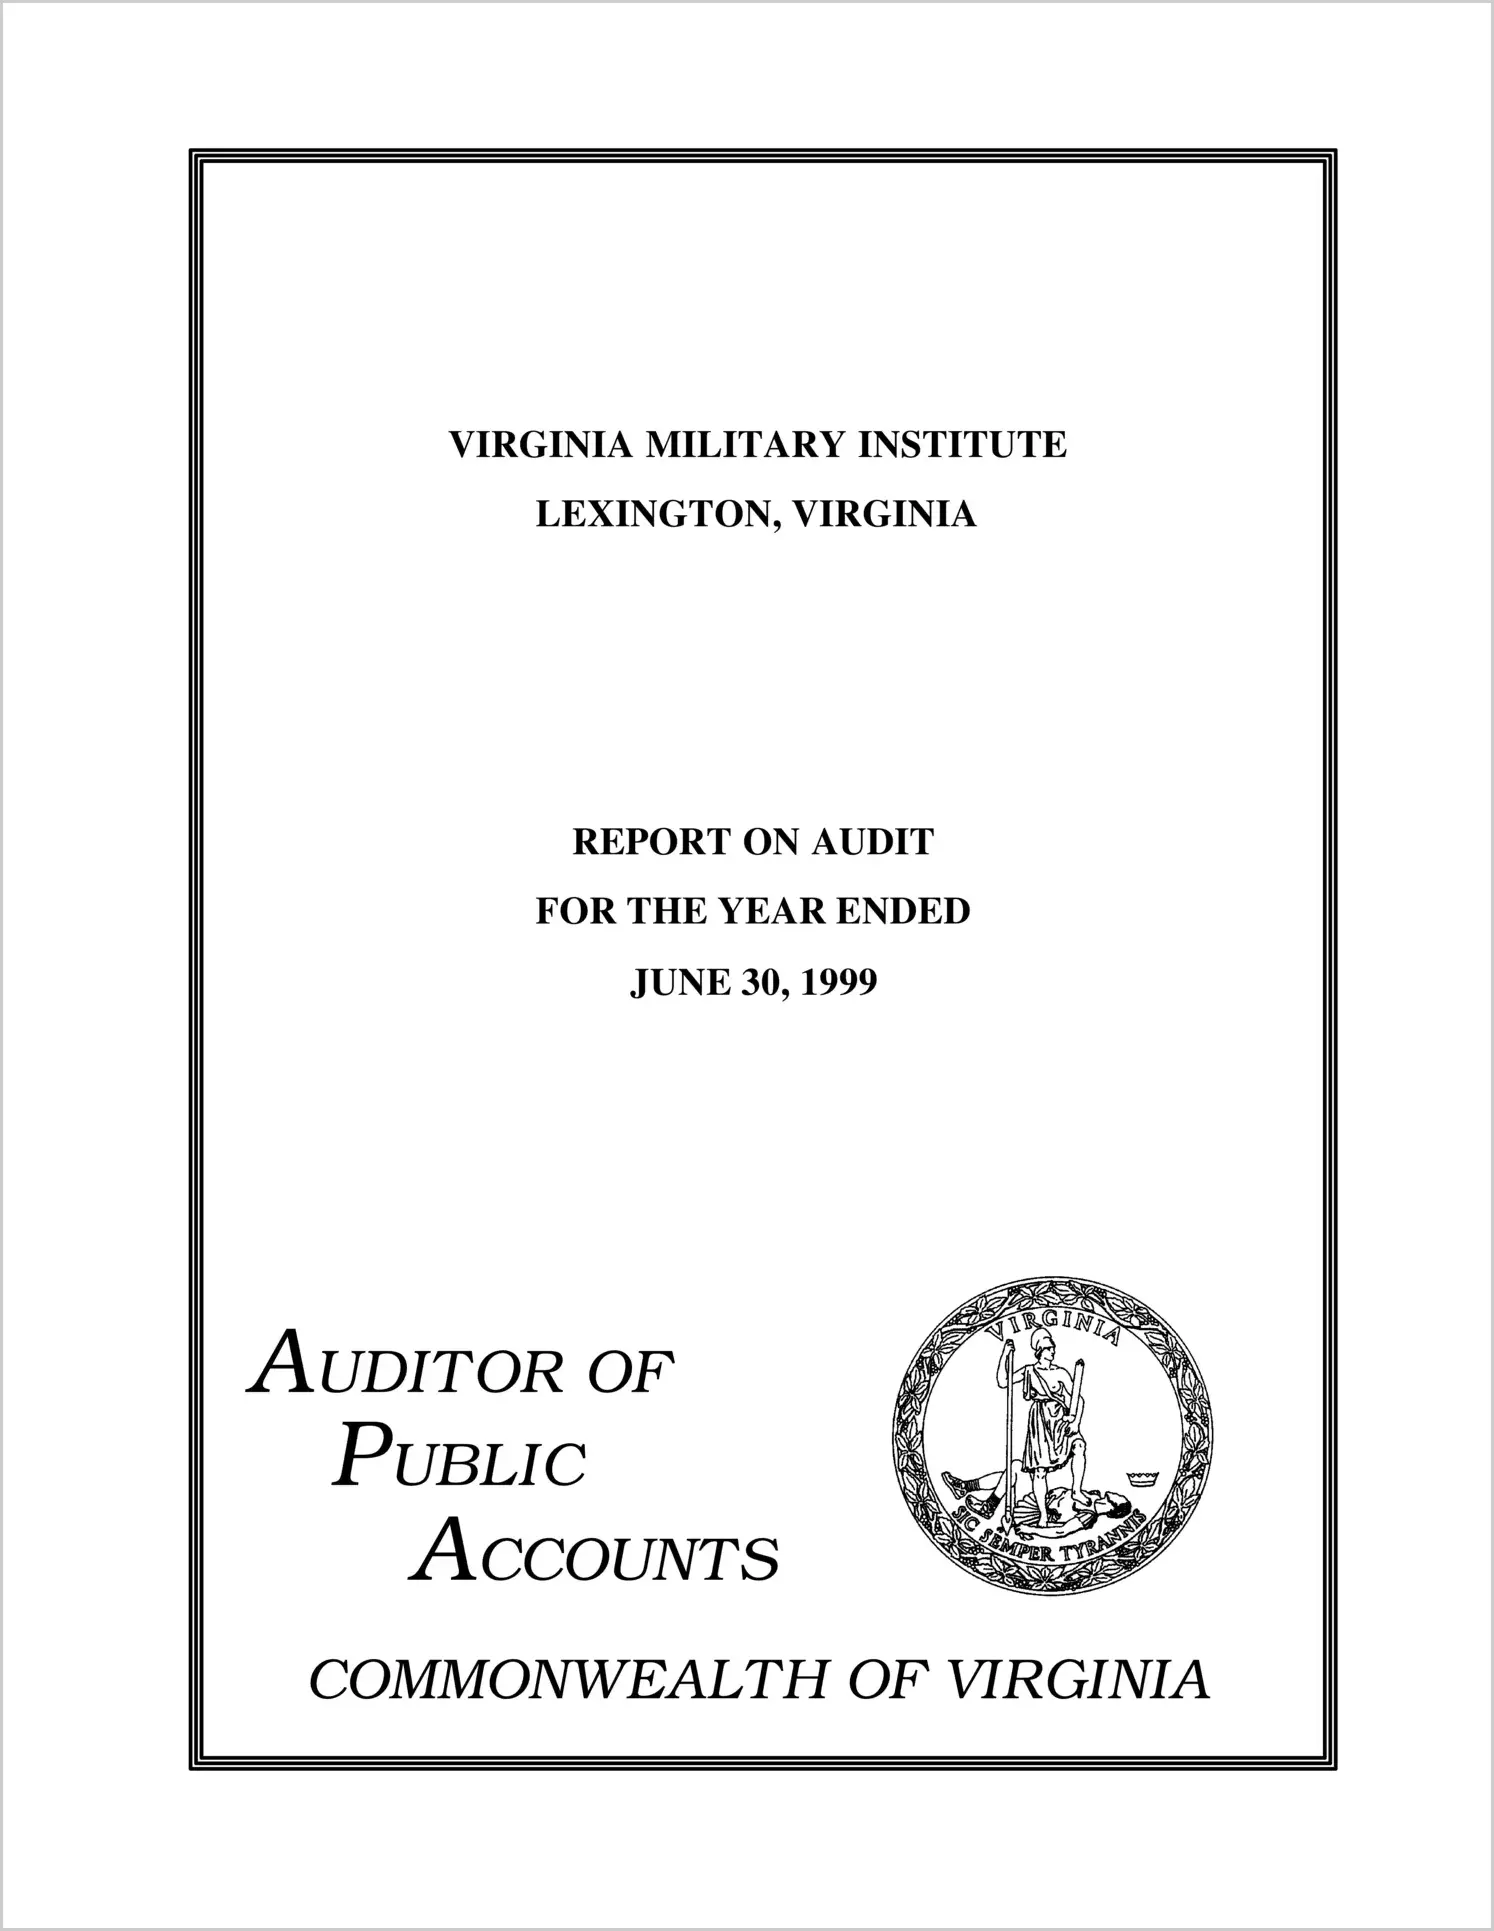 Virginia Military Institute for the year ended June 30, 1999